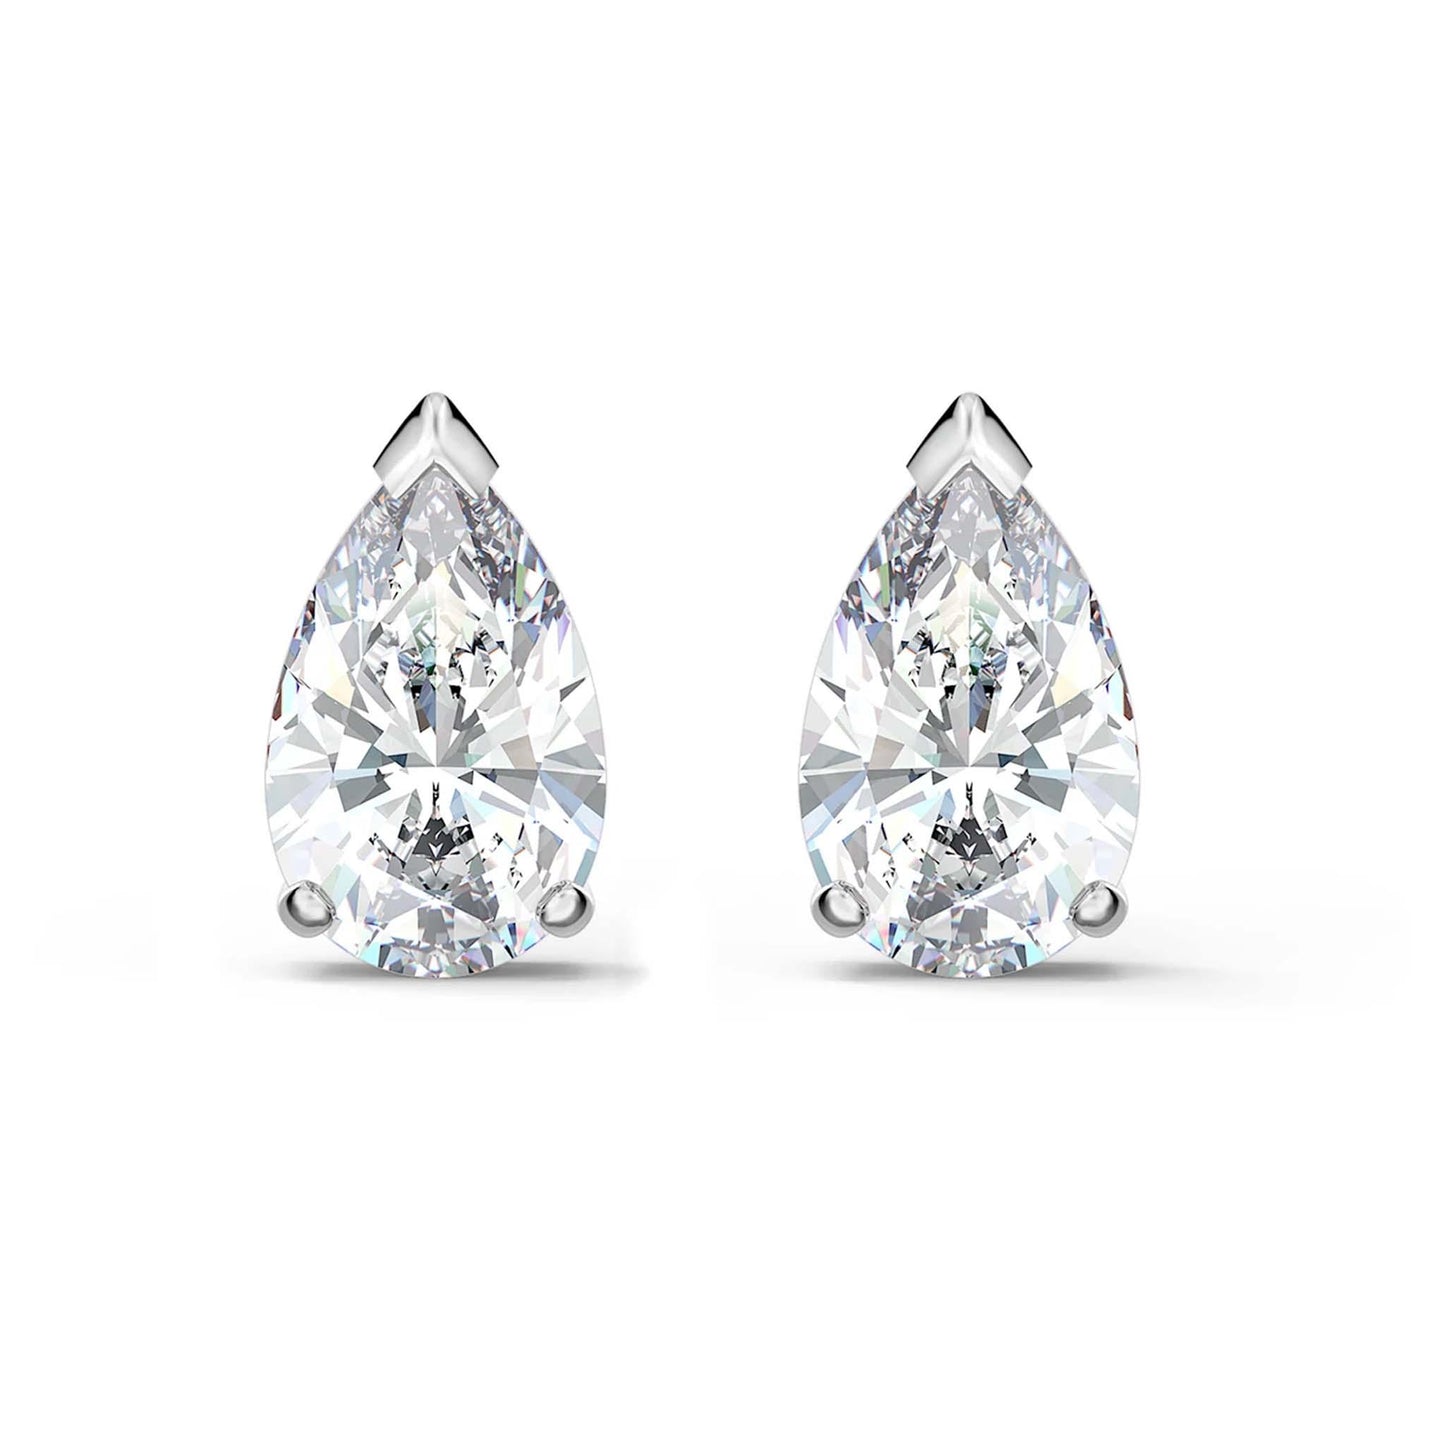 Attract stud earrings - Cosmos Boutique New Jersey